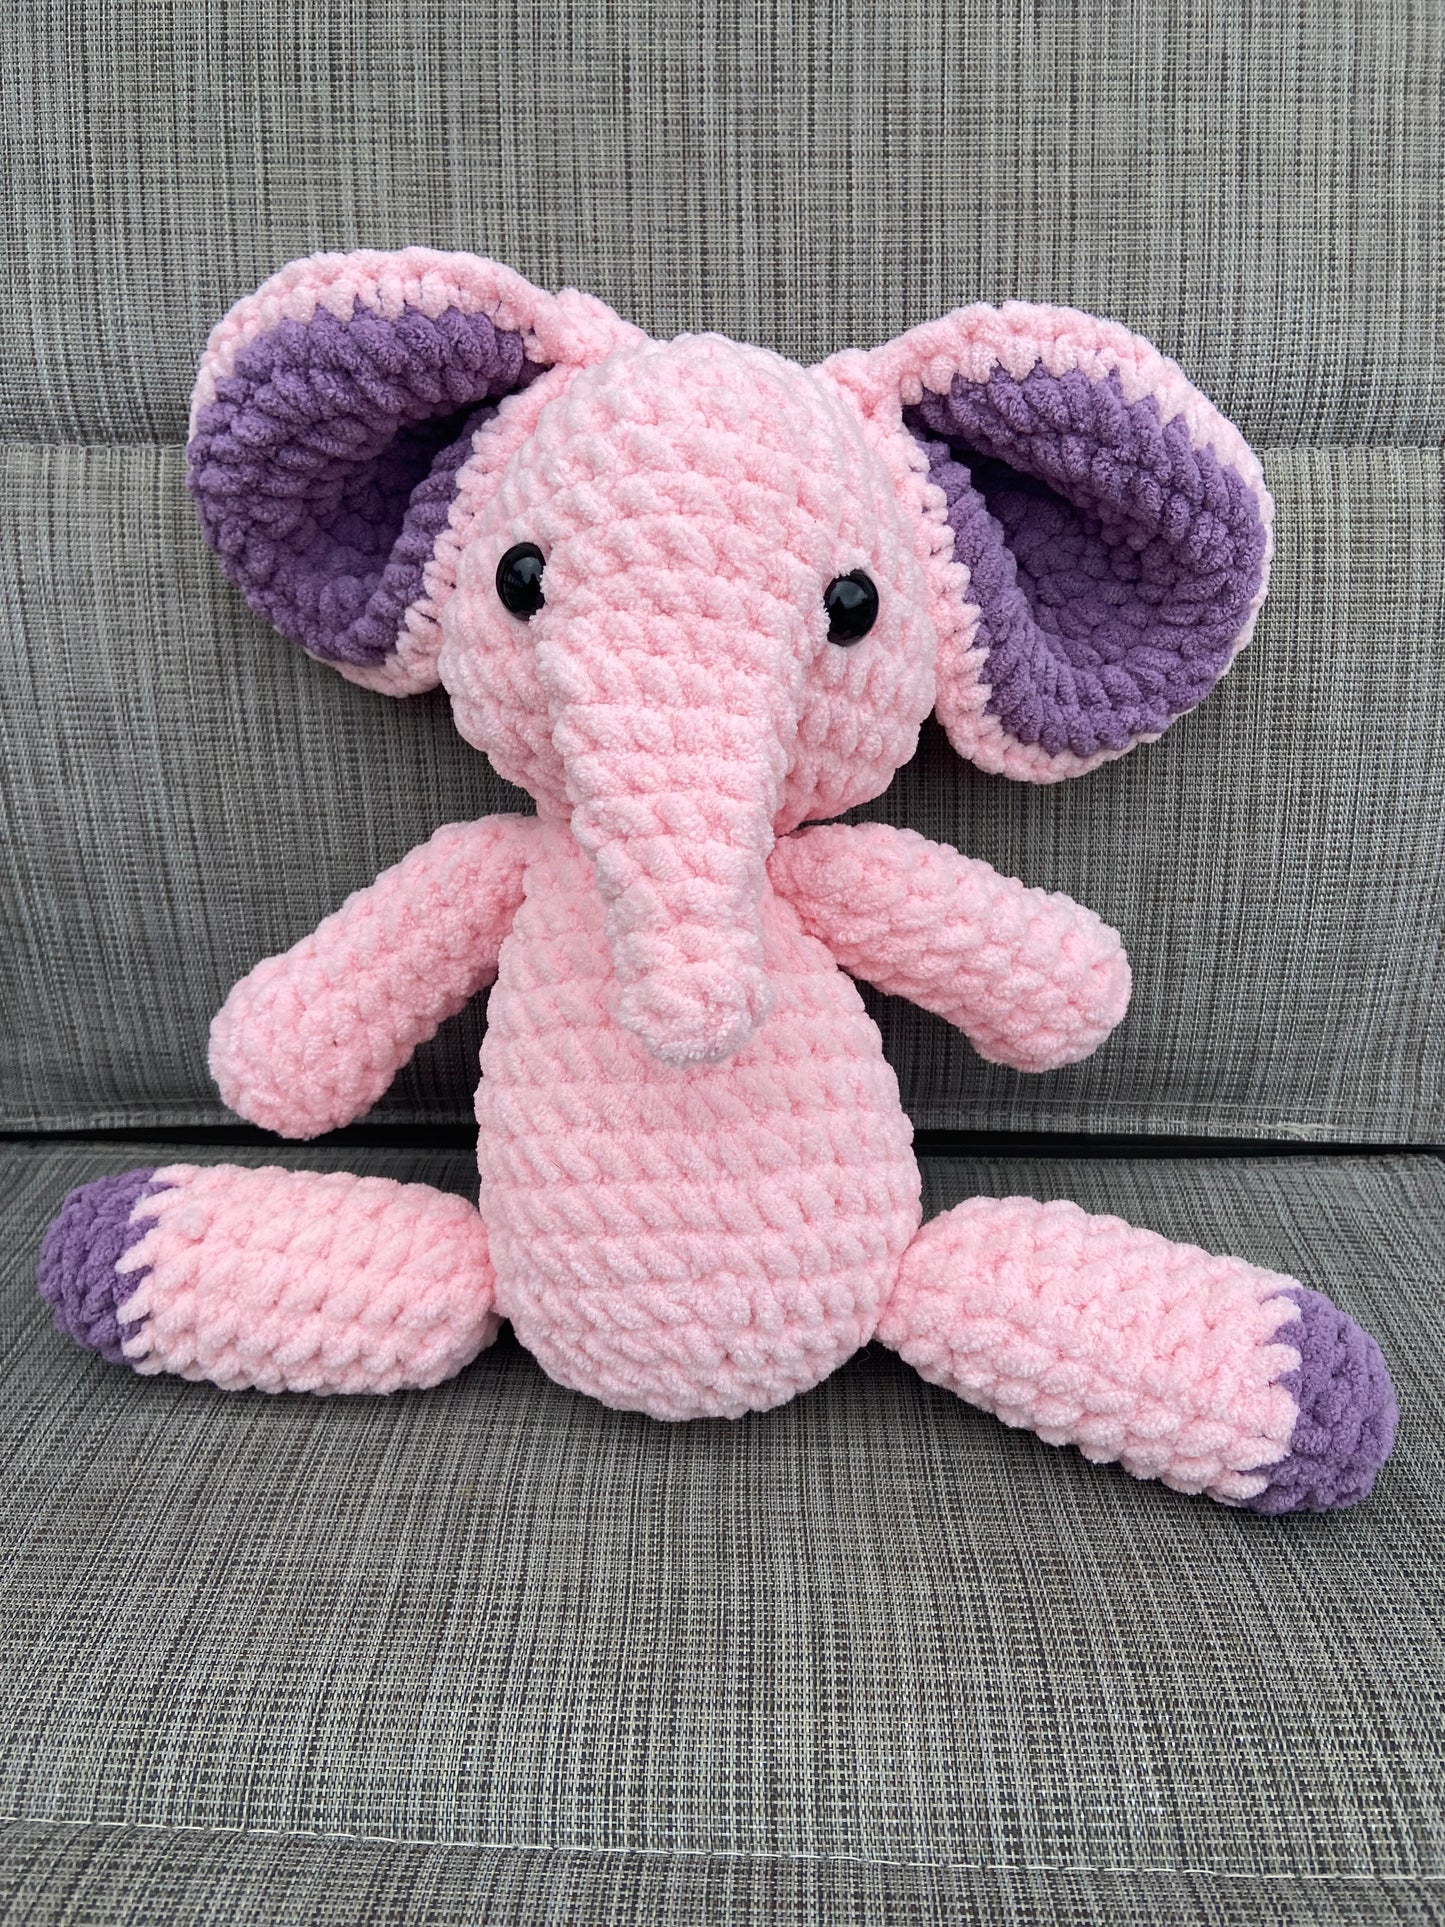 Handmade Crochet Pink Elephant: Charming and Cuddly Plush Toy for Kids